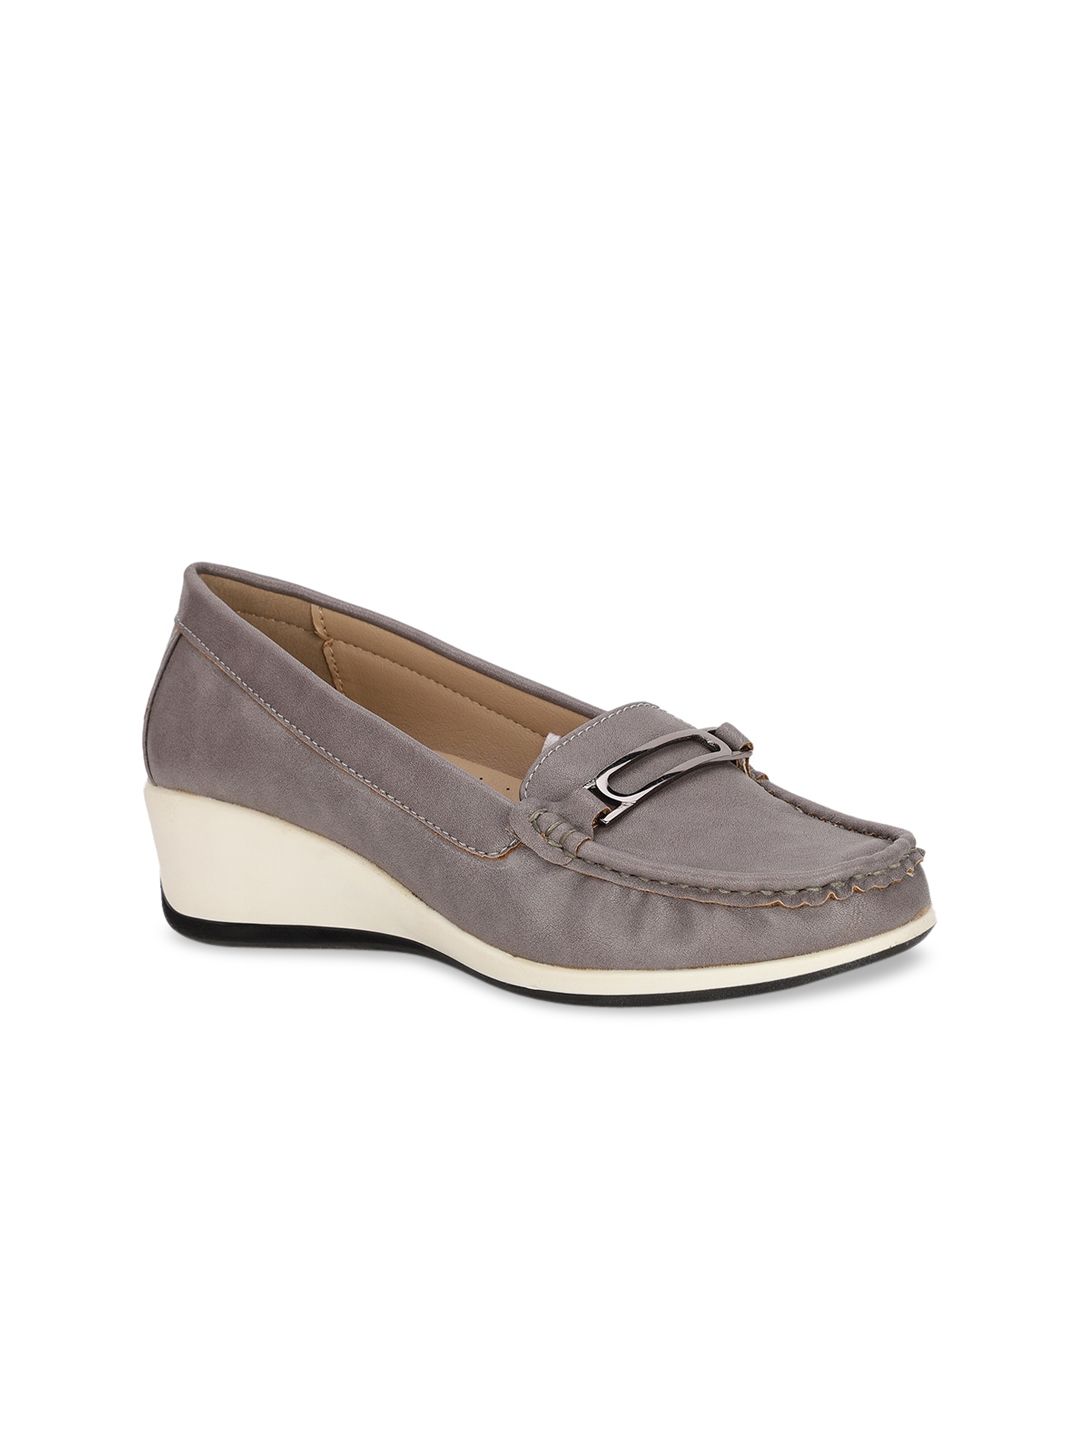 Bata Women Grey Leather Loafers Price in India